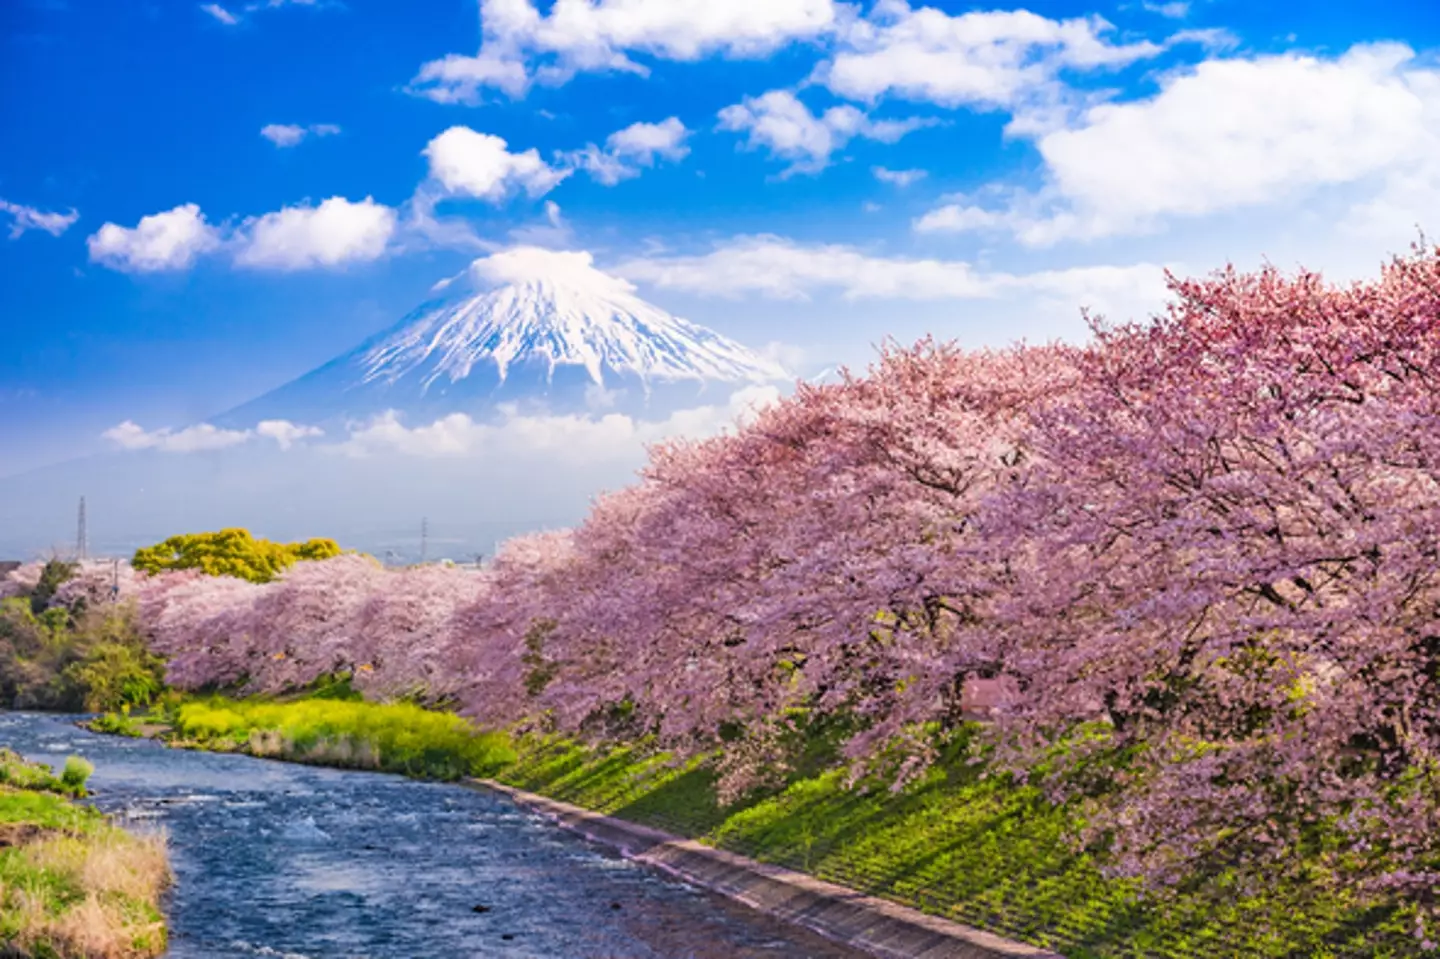 Passengers will be able to explore the wonders of Japan.